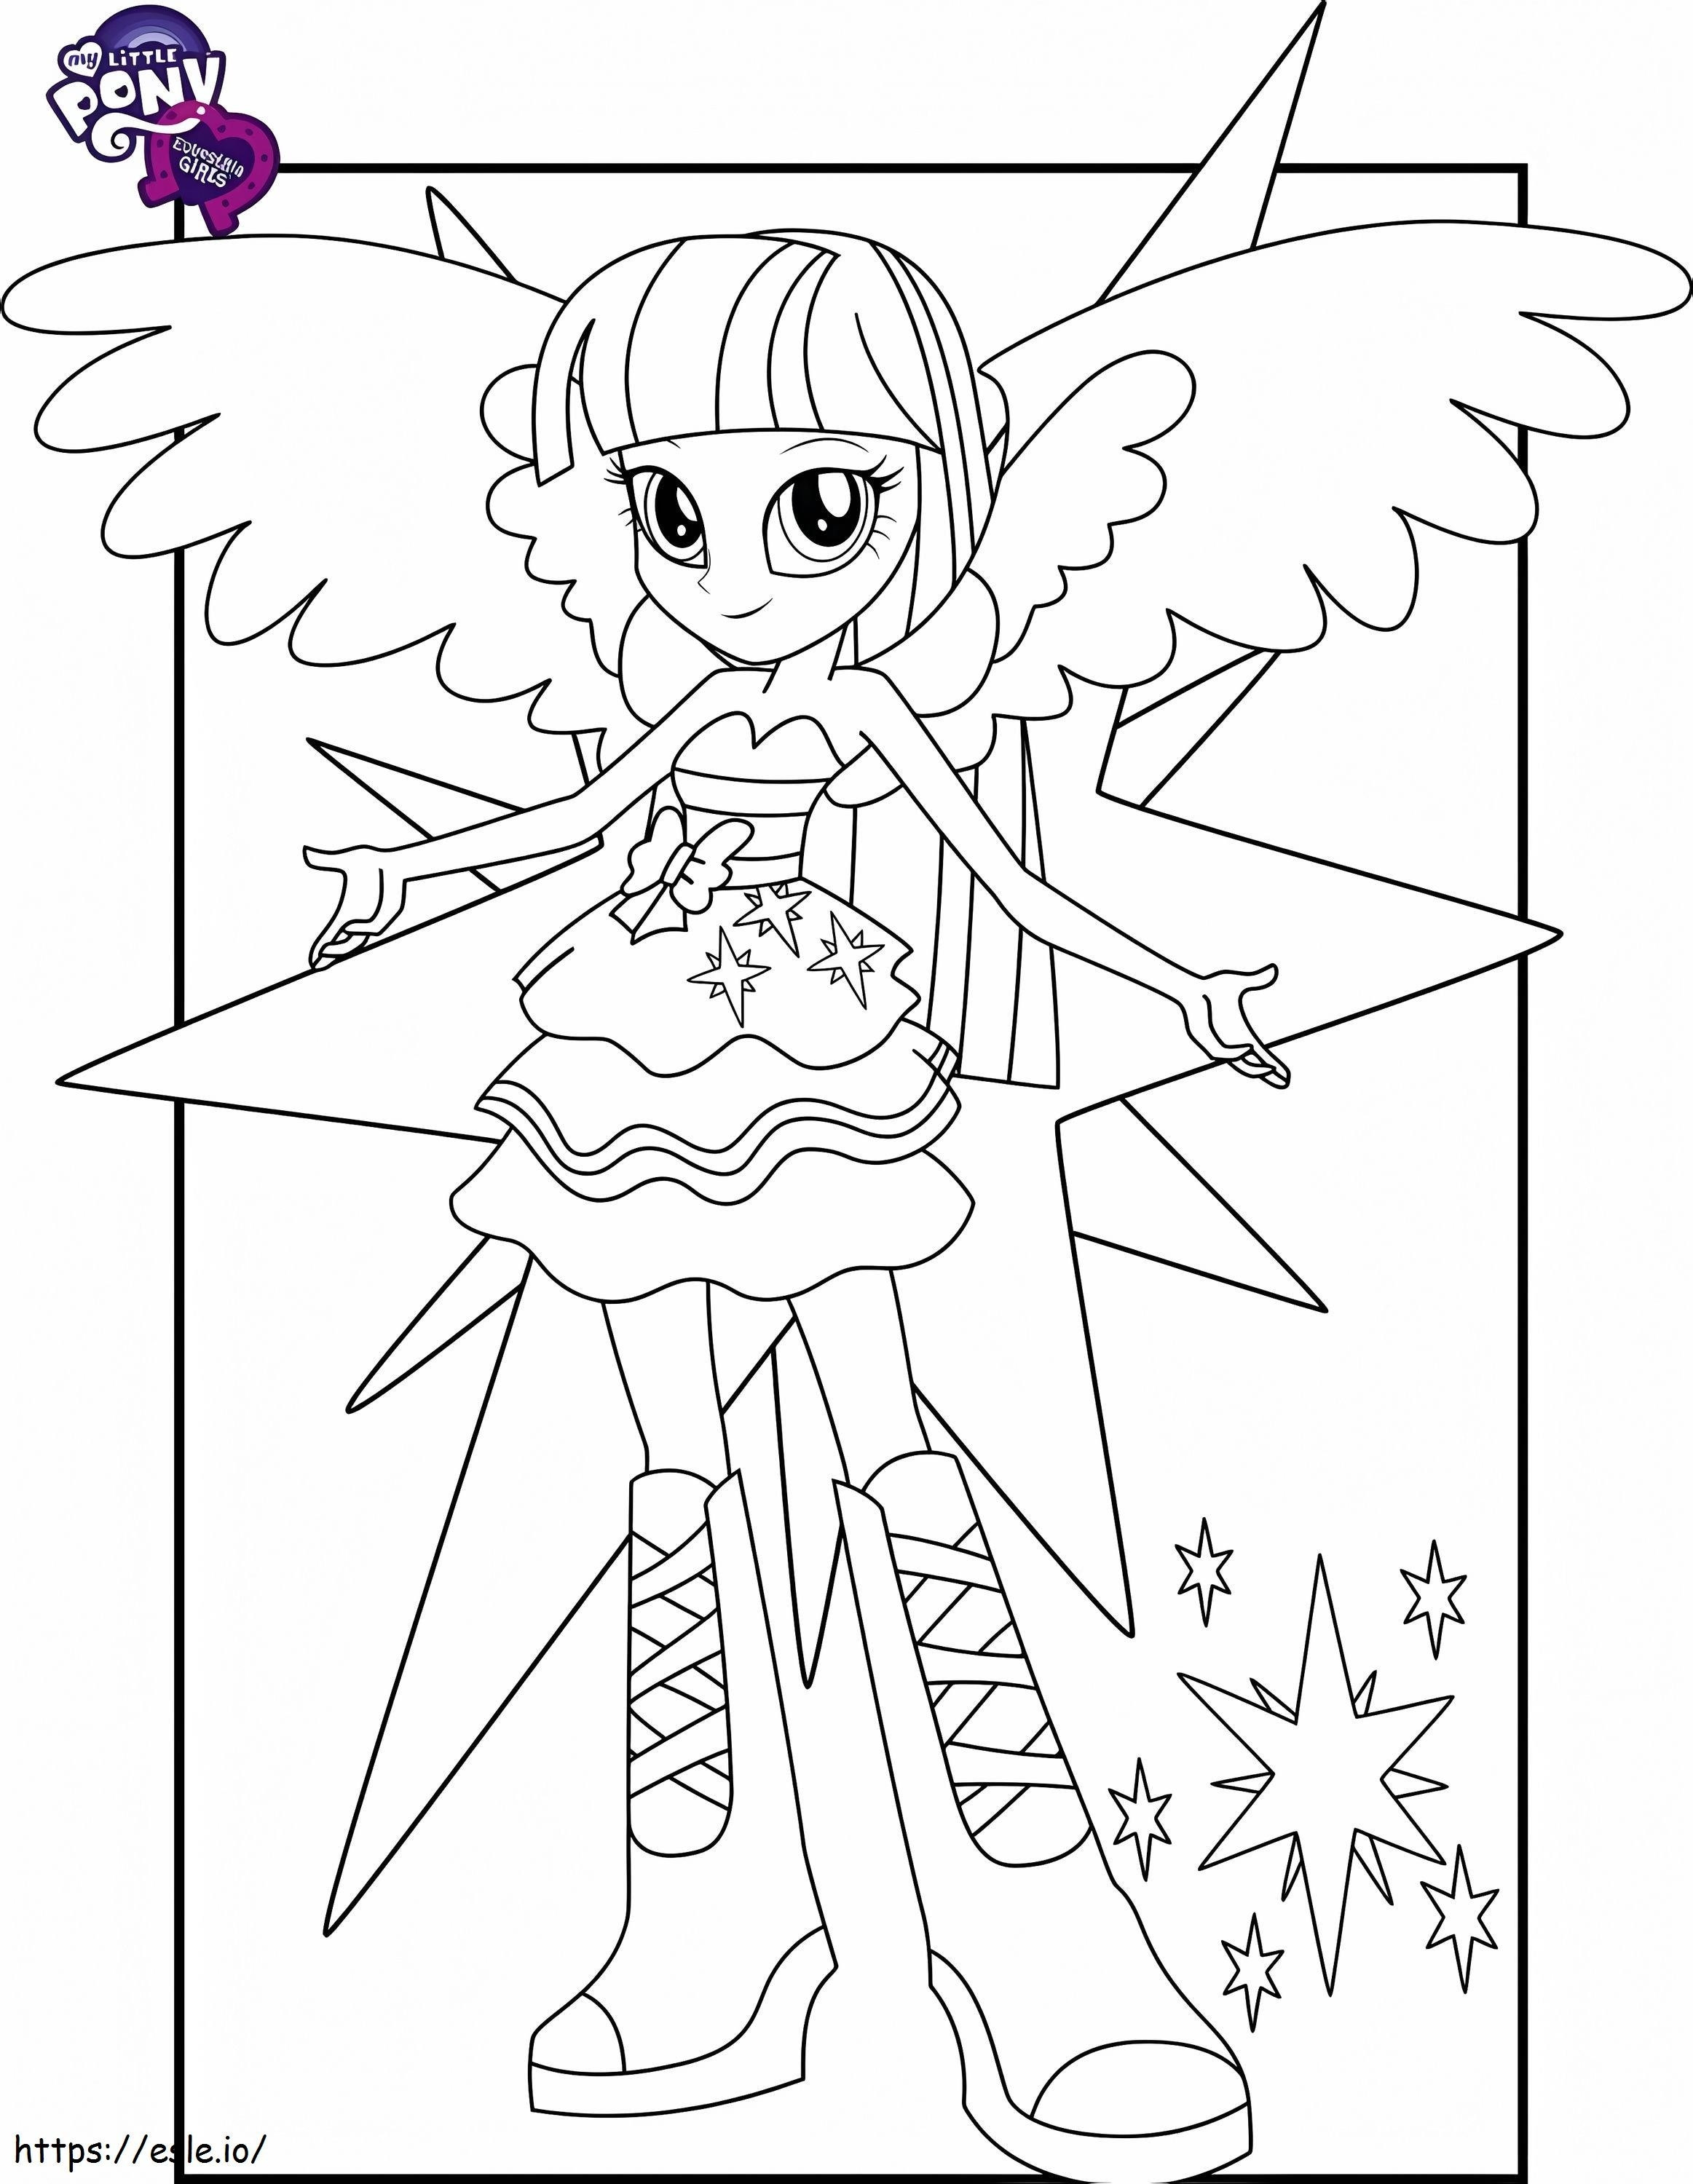 1535162117 Twilight Sparkle A4 coloring page